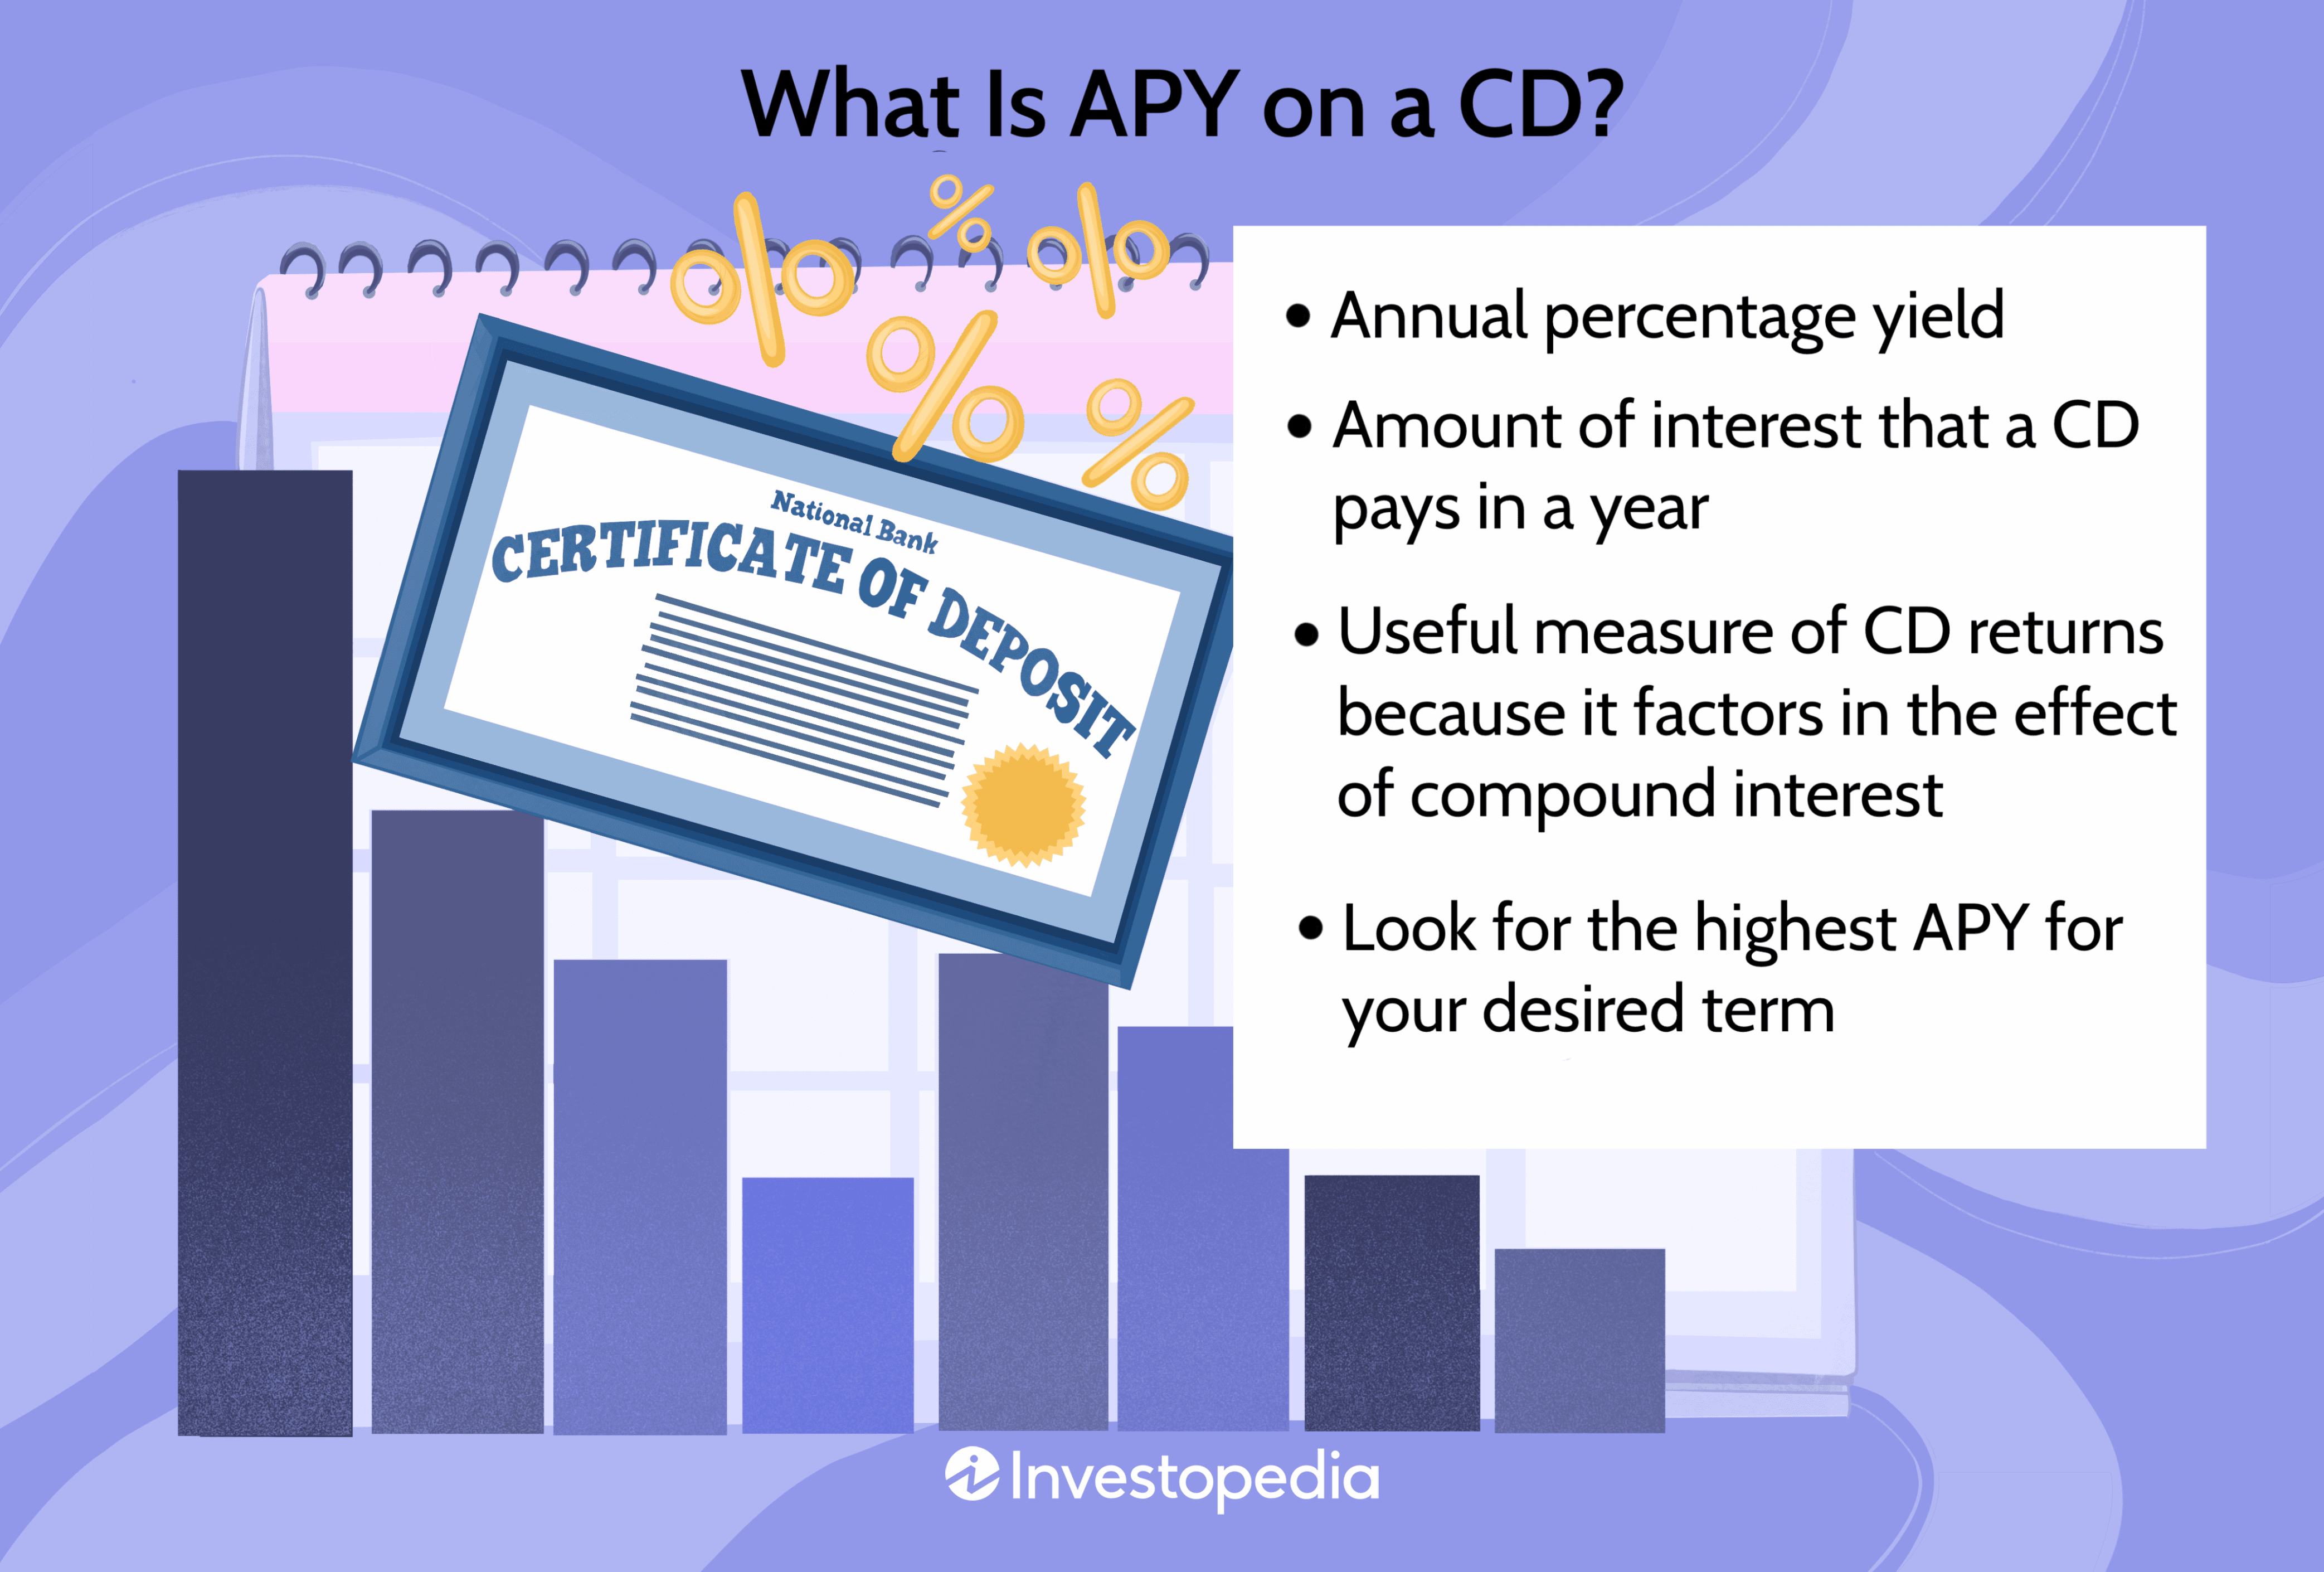 What Is APY on a CD?